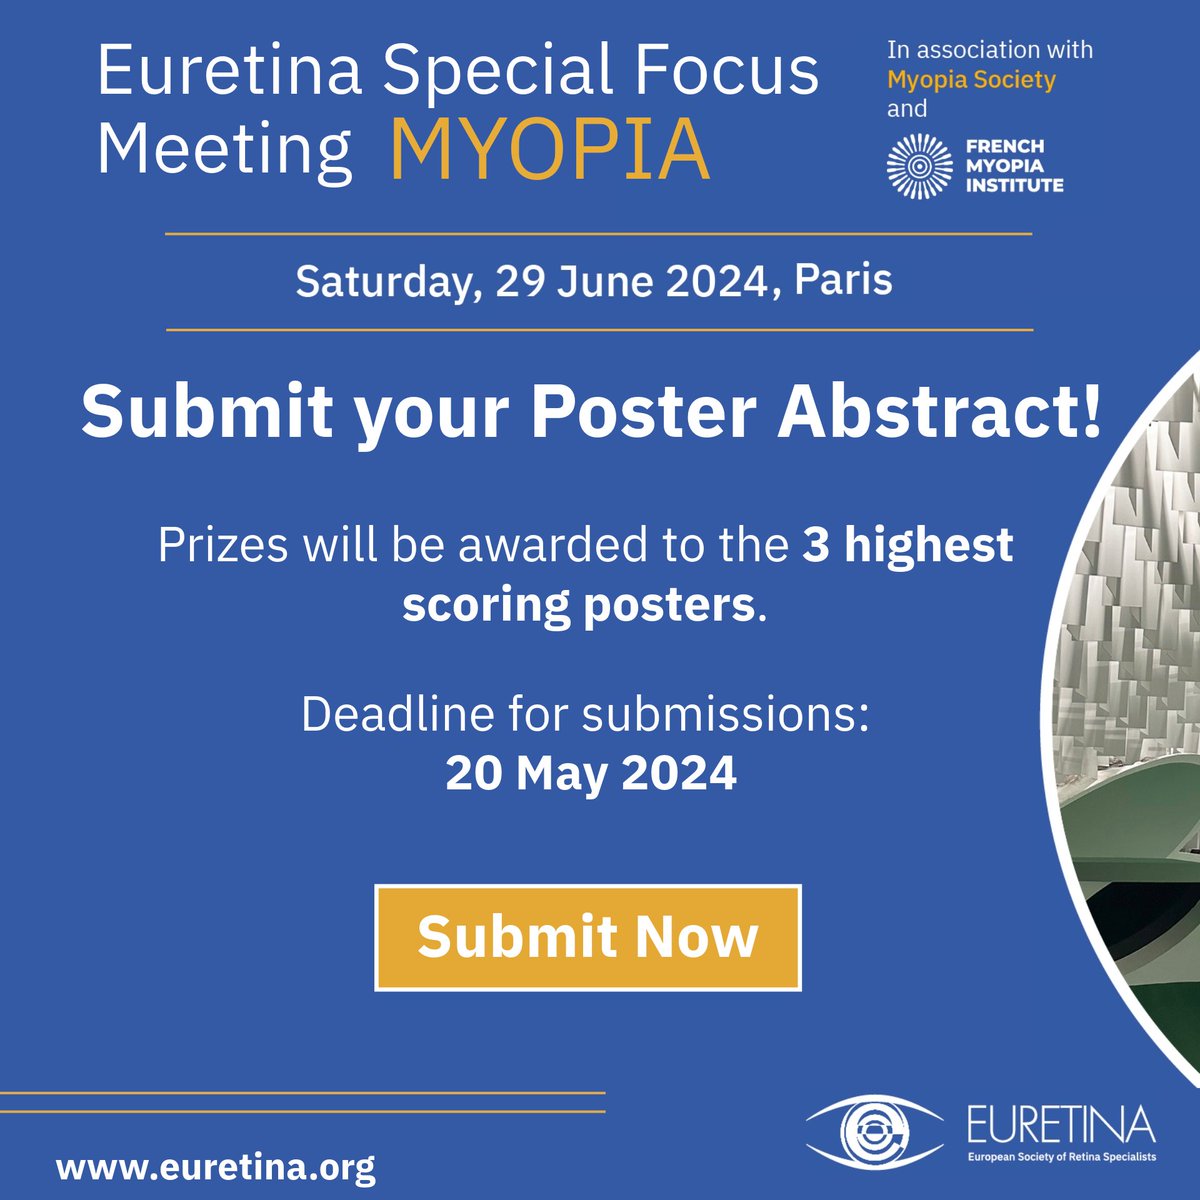 🚀 Calling all researchers! Submit your poster abstracts for our Special Focus Meeting on Myopia by 20 May. Showcase your innovative work in Paris! 📌 Submit Here: ow.ly/4l2t50RB6UN #MyopiaFocus2024 #EURETINA